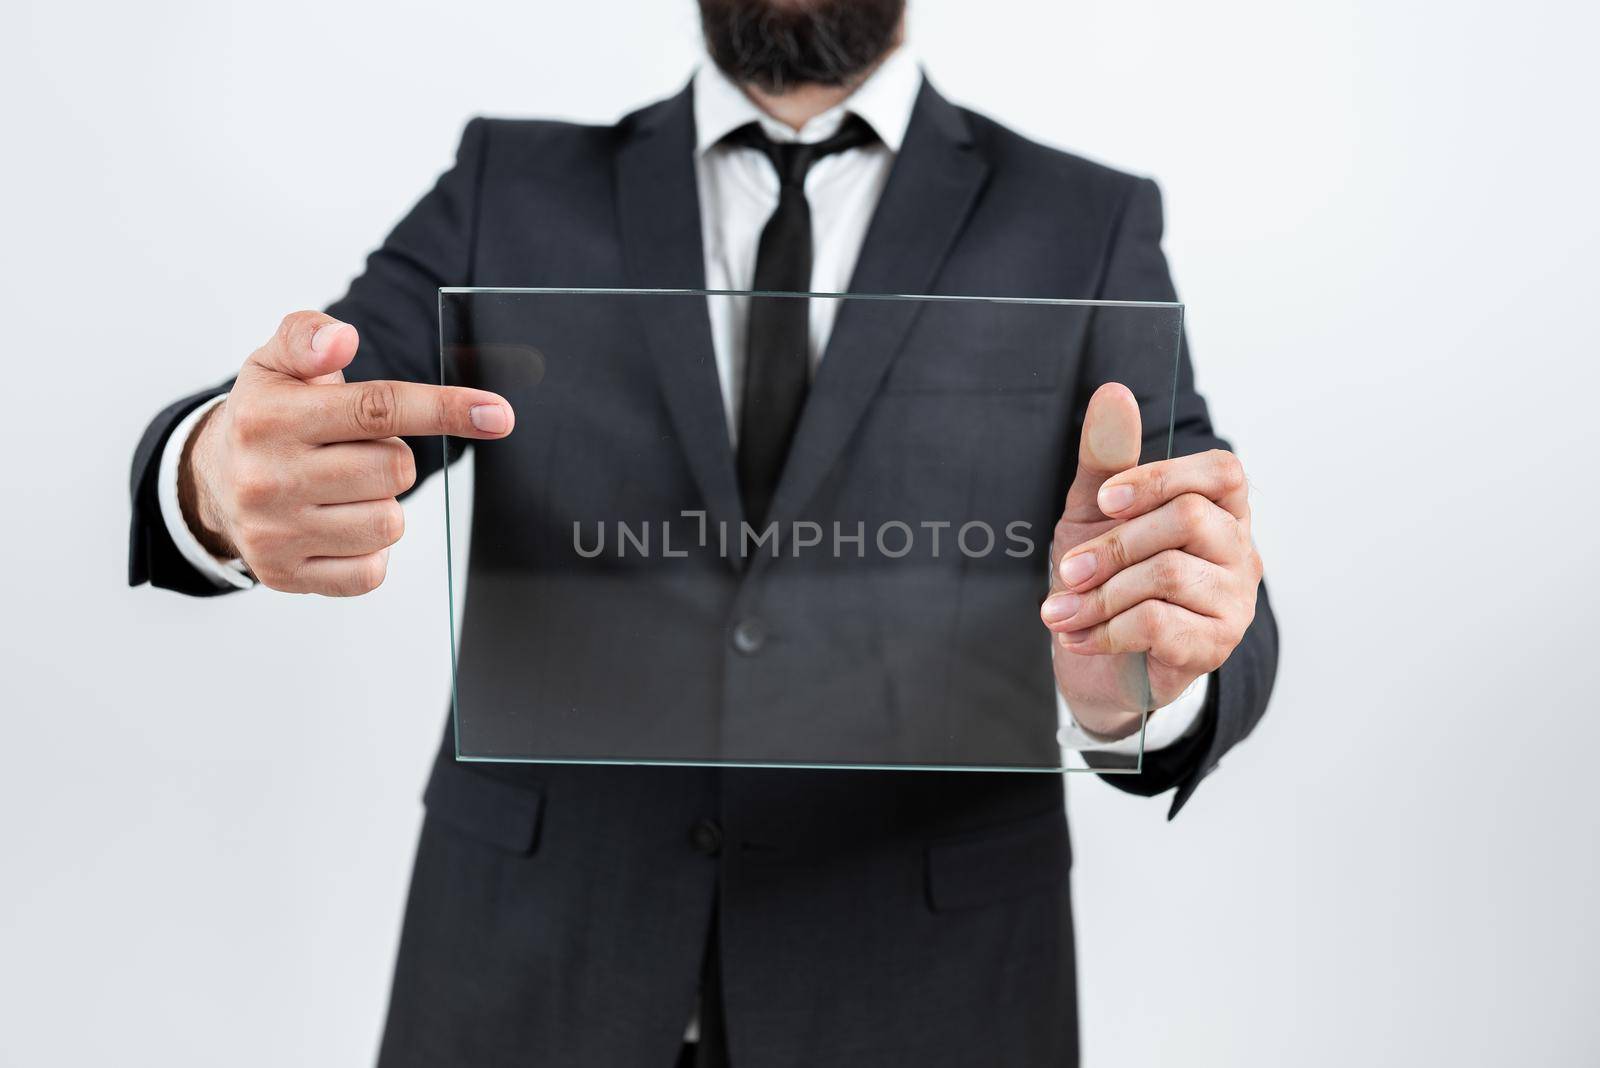 Male Corporate Holding And Pointing At Transparent Glass And Displaying Important Announcement. Businessman Wearing Suit Showing Rectangular Board And Promoting The Brand. by nialowwa